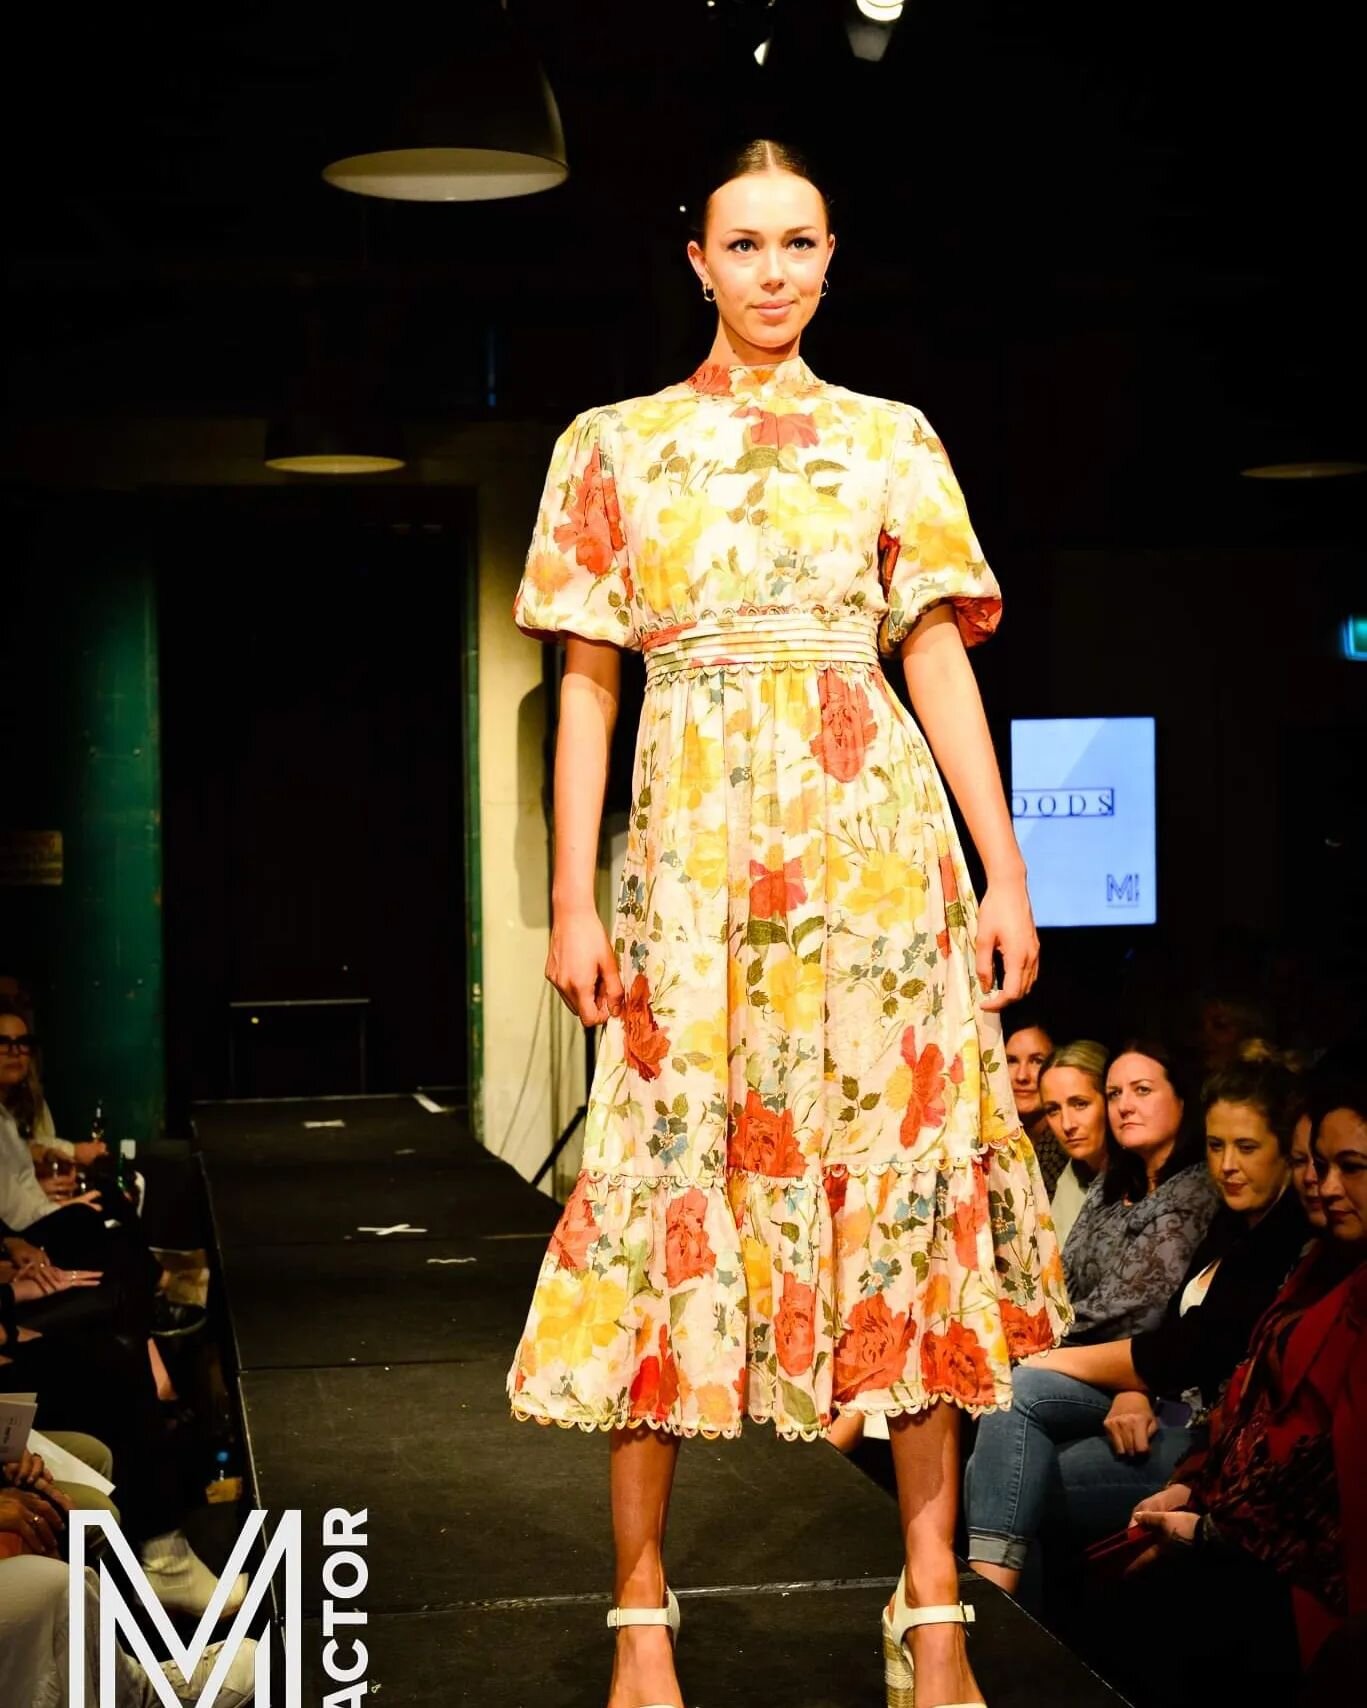 WOW!
.
What an absolutely incredible evening and event the MF Fashion Show was at The Substation! What's even better is the amount this event has raised for Ronald McDonald House South Island.
.
So much work went on behind the scenes, on the day and 